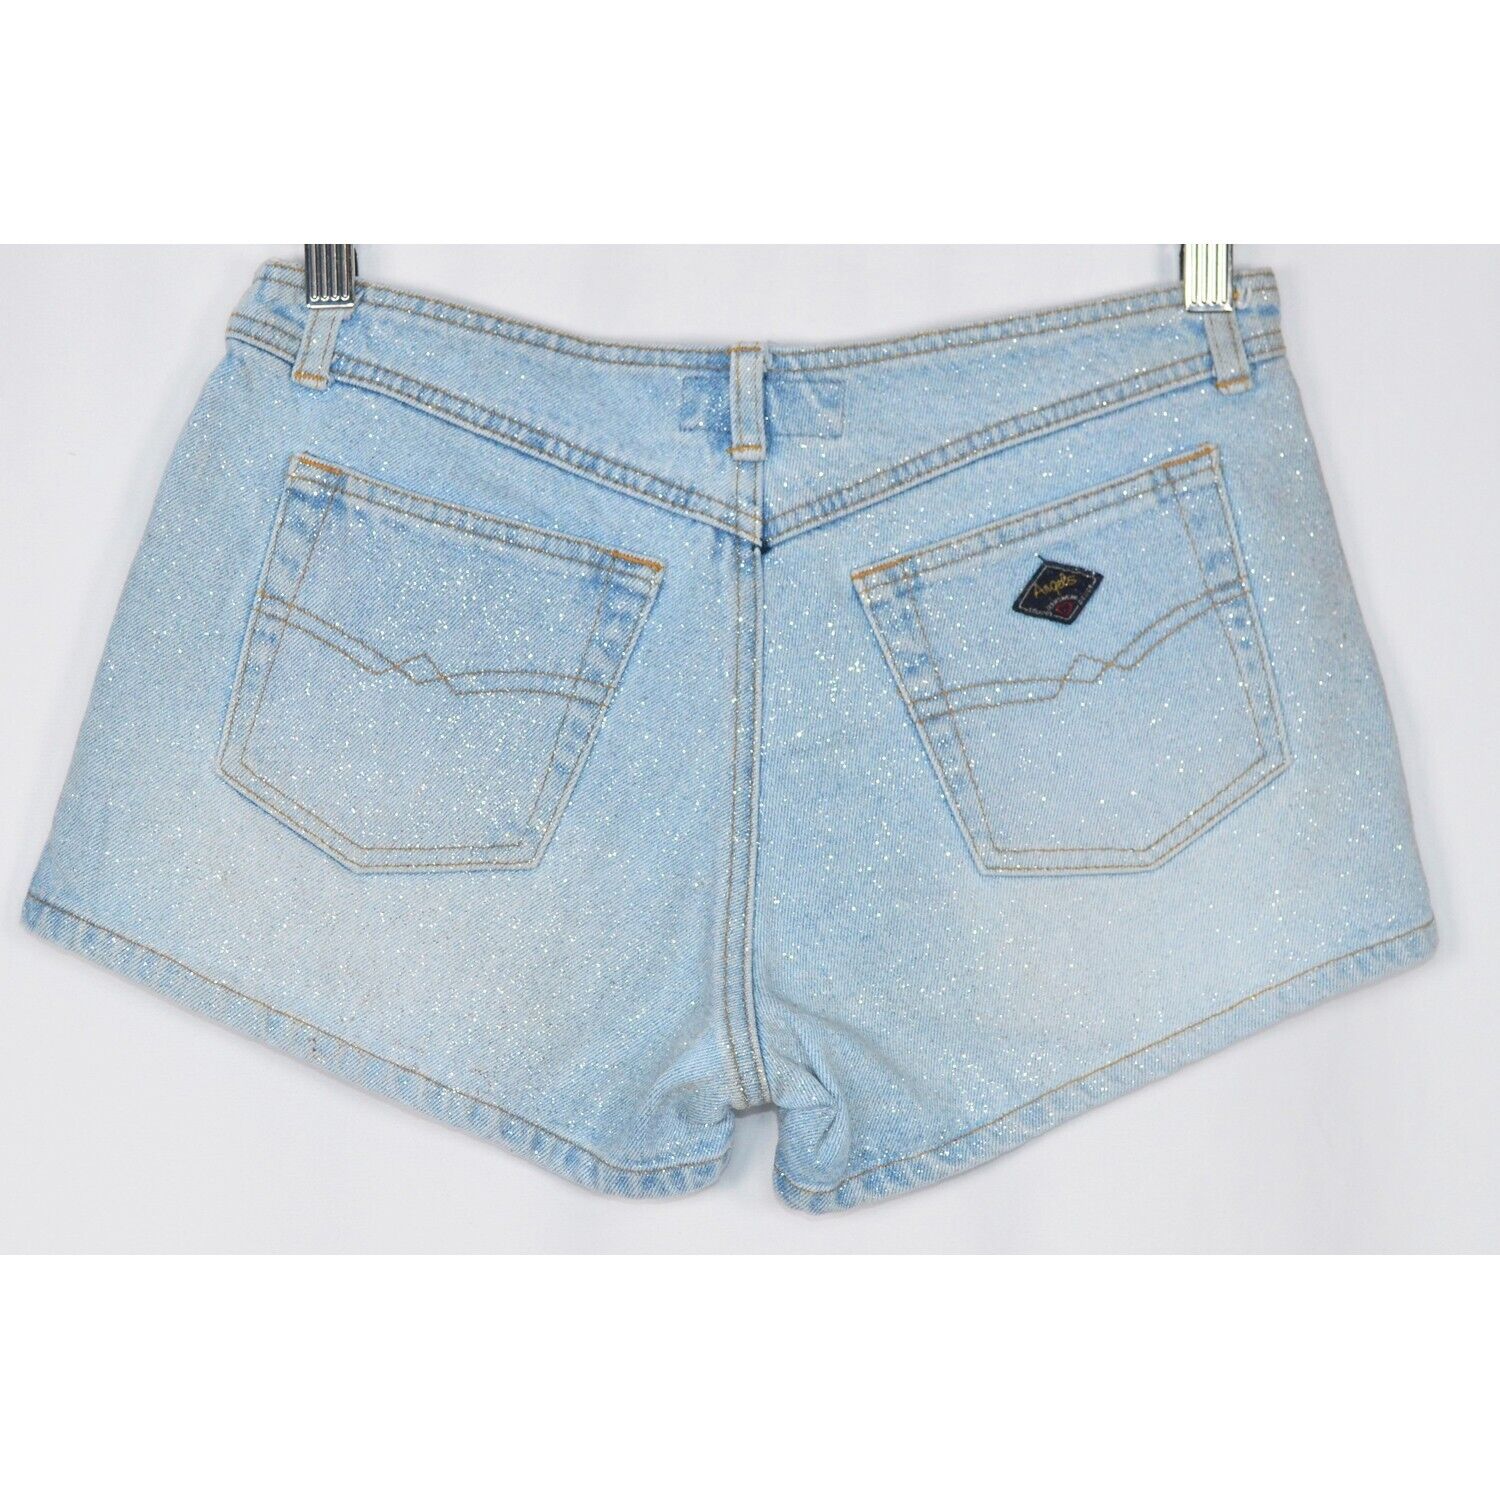 Angel's Y2K Low Rise Shorts in Light Wash! Totally